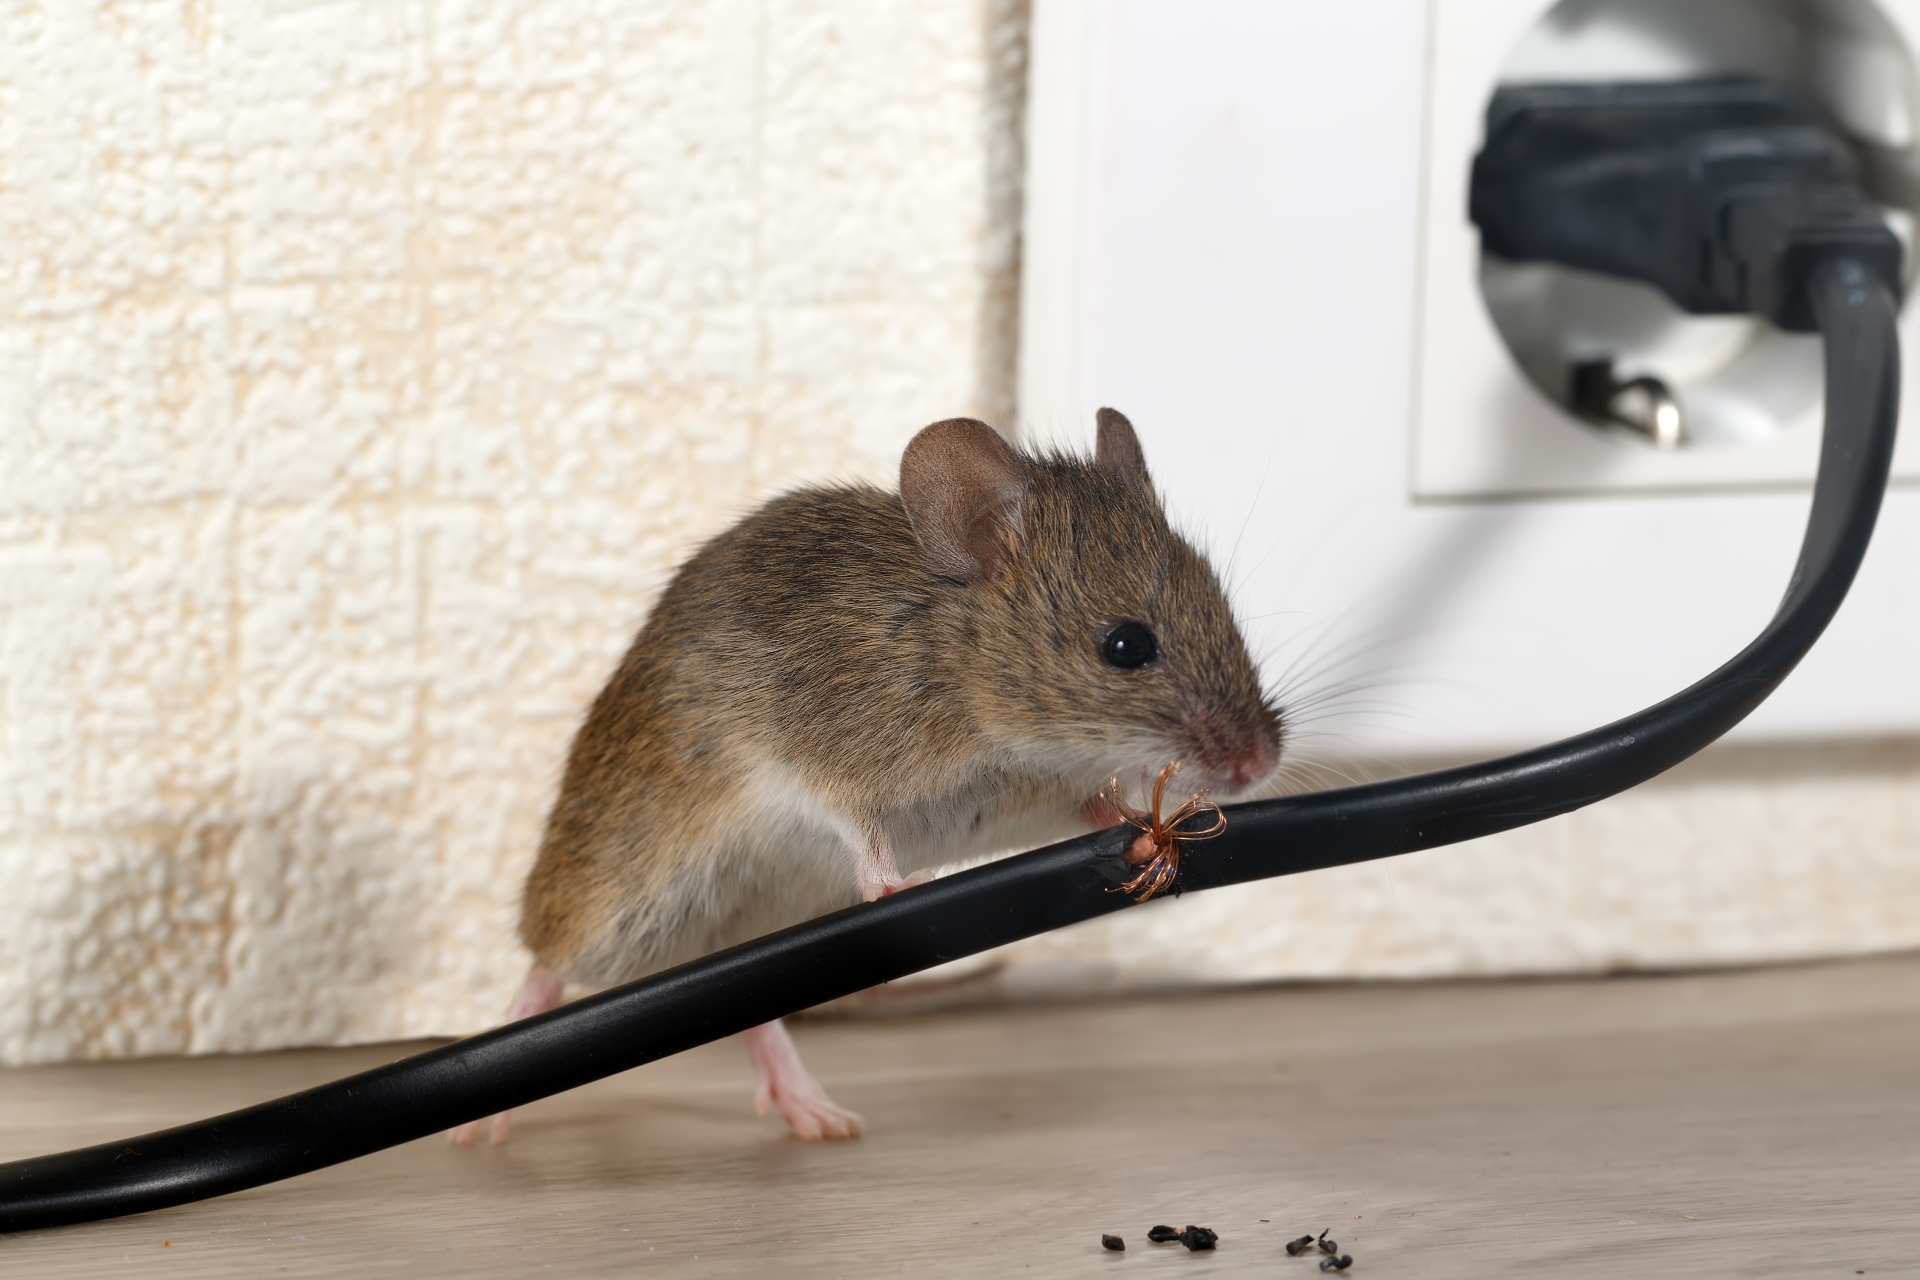 Mice Infestation, Pest Control in Stanmore, Queensbury, HA7. Call Now 020 8166 9746